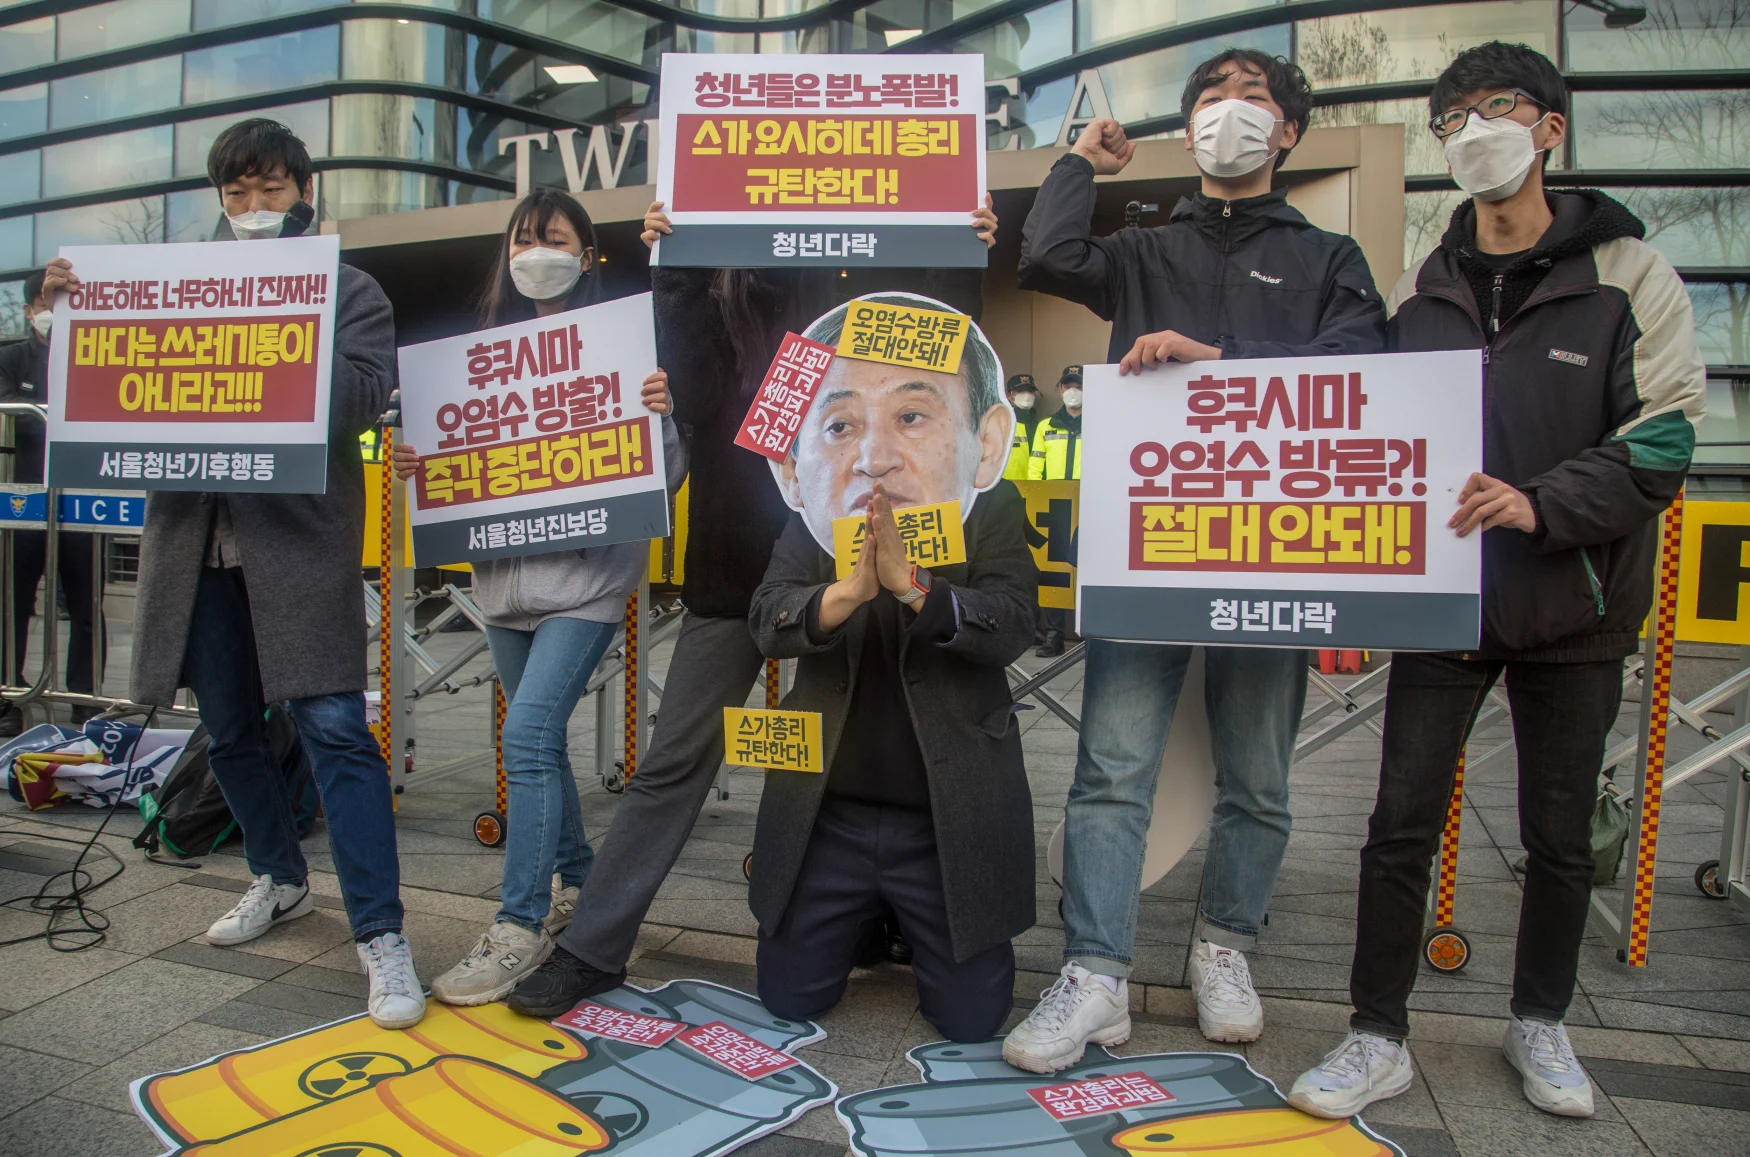 SEOUL, SOUTH KOREA - 2021/04/13: An activist wearing a cut out depicting Japanese Prime Minister Yoshihide Suga, while colleagues holding placards expressing their opinion during the demonstration.
South Korean activists protest against the Japanese government's decision to discharge radioactive water from Fukushima Daiichi Nuclear Power Plant in Japan, in front of the Japanese Embassy in Seoul. (Photo by Jaewon Lee/SOPA Images/LightRocket via Getty Images)